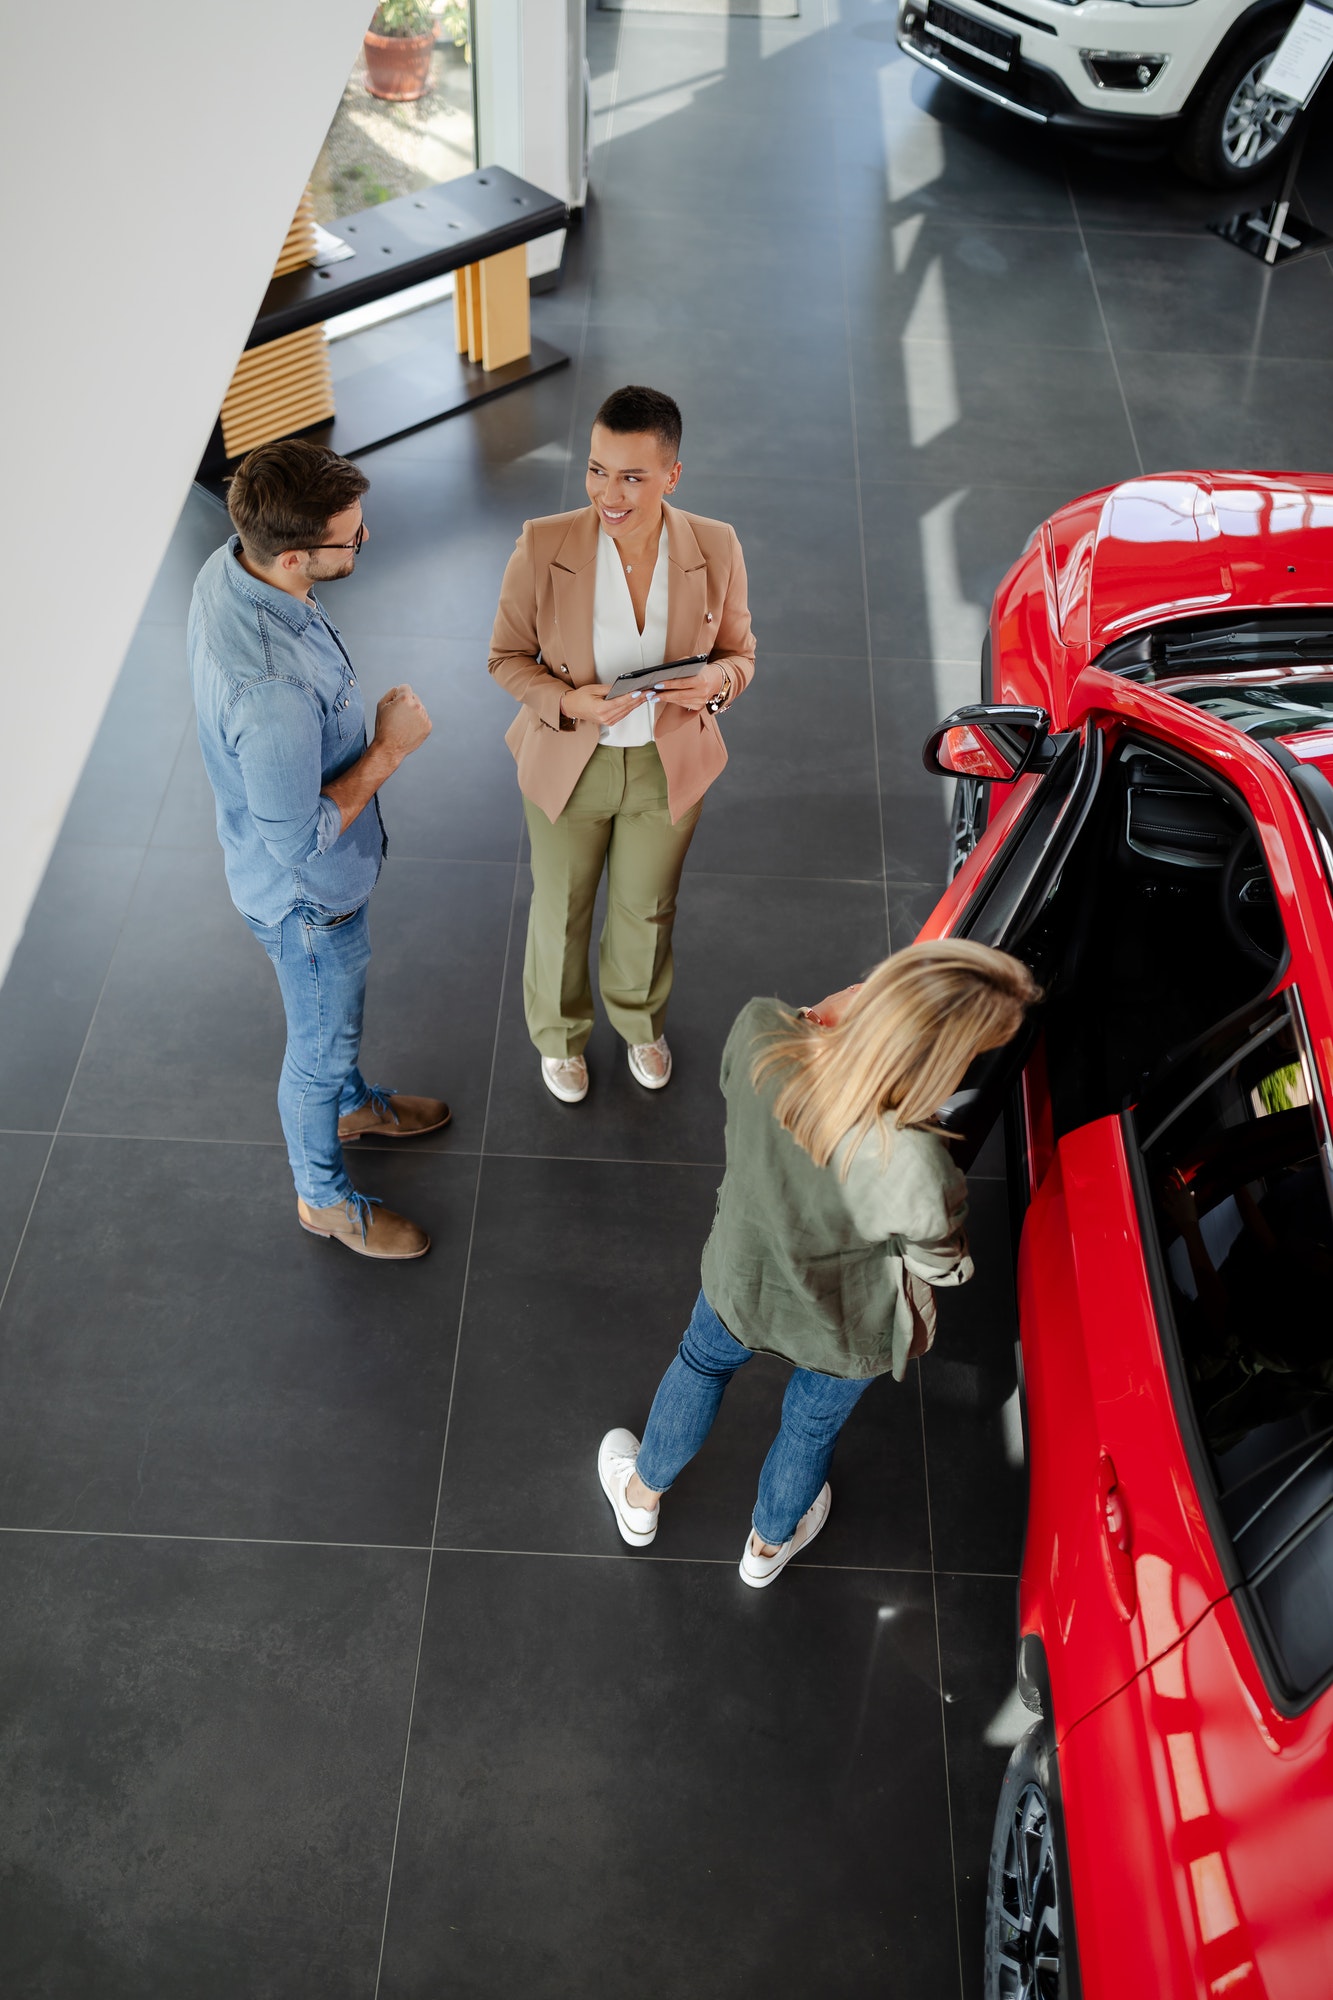 couple choosing and buying car at car showroom. Car saleswoman helps them to make right decision.